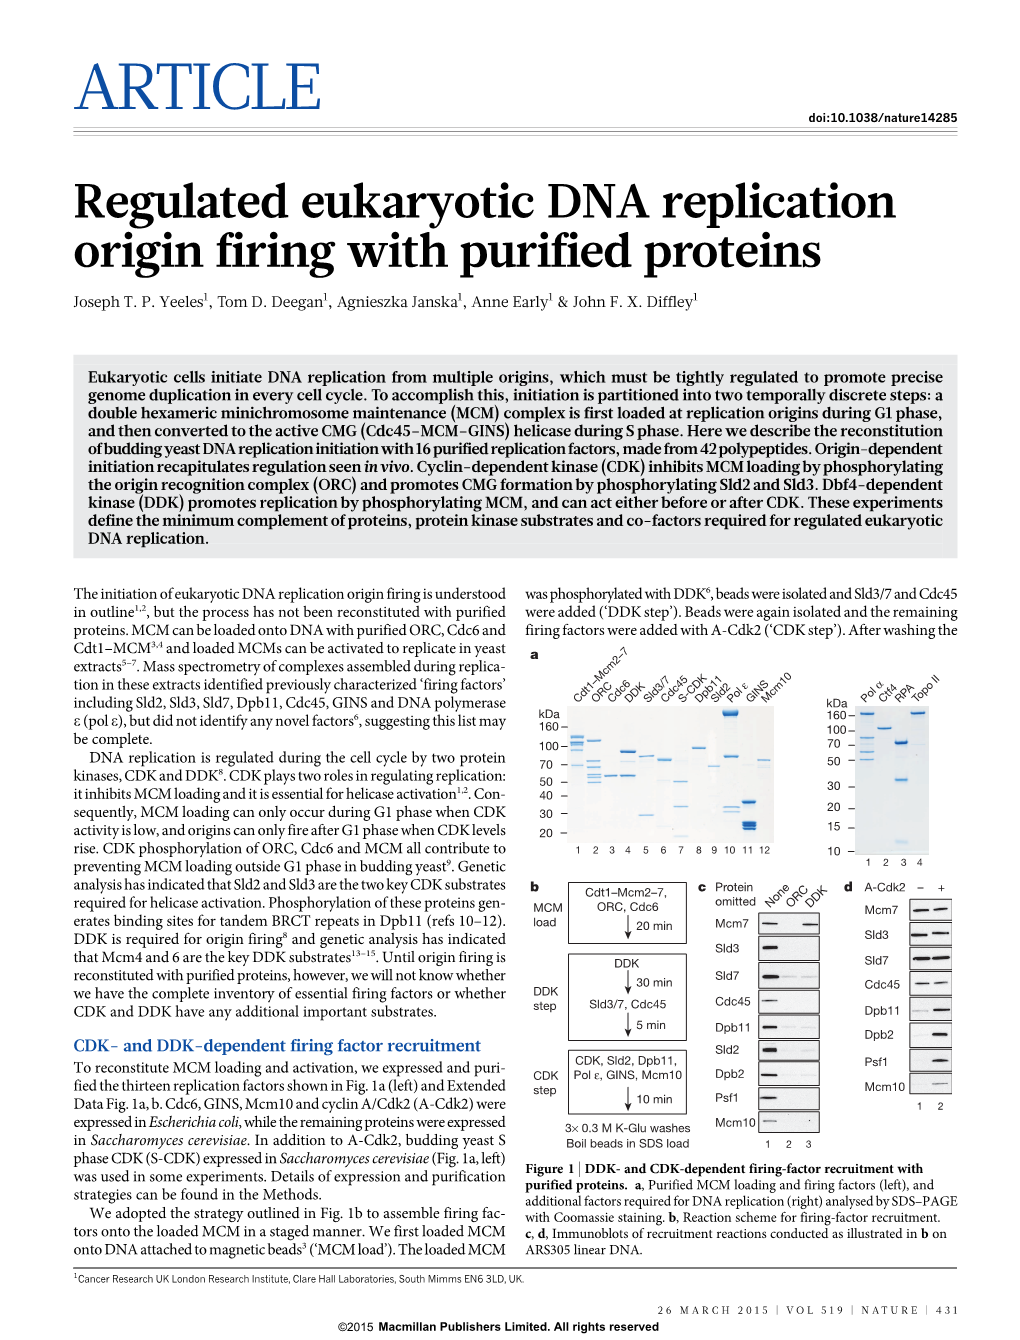 Regulated Eukaryotic DNA Replication Origin Firing with Purified Proteins